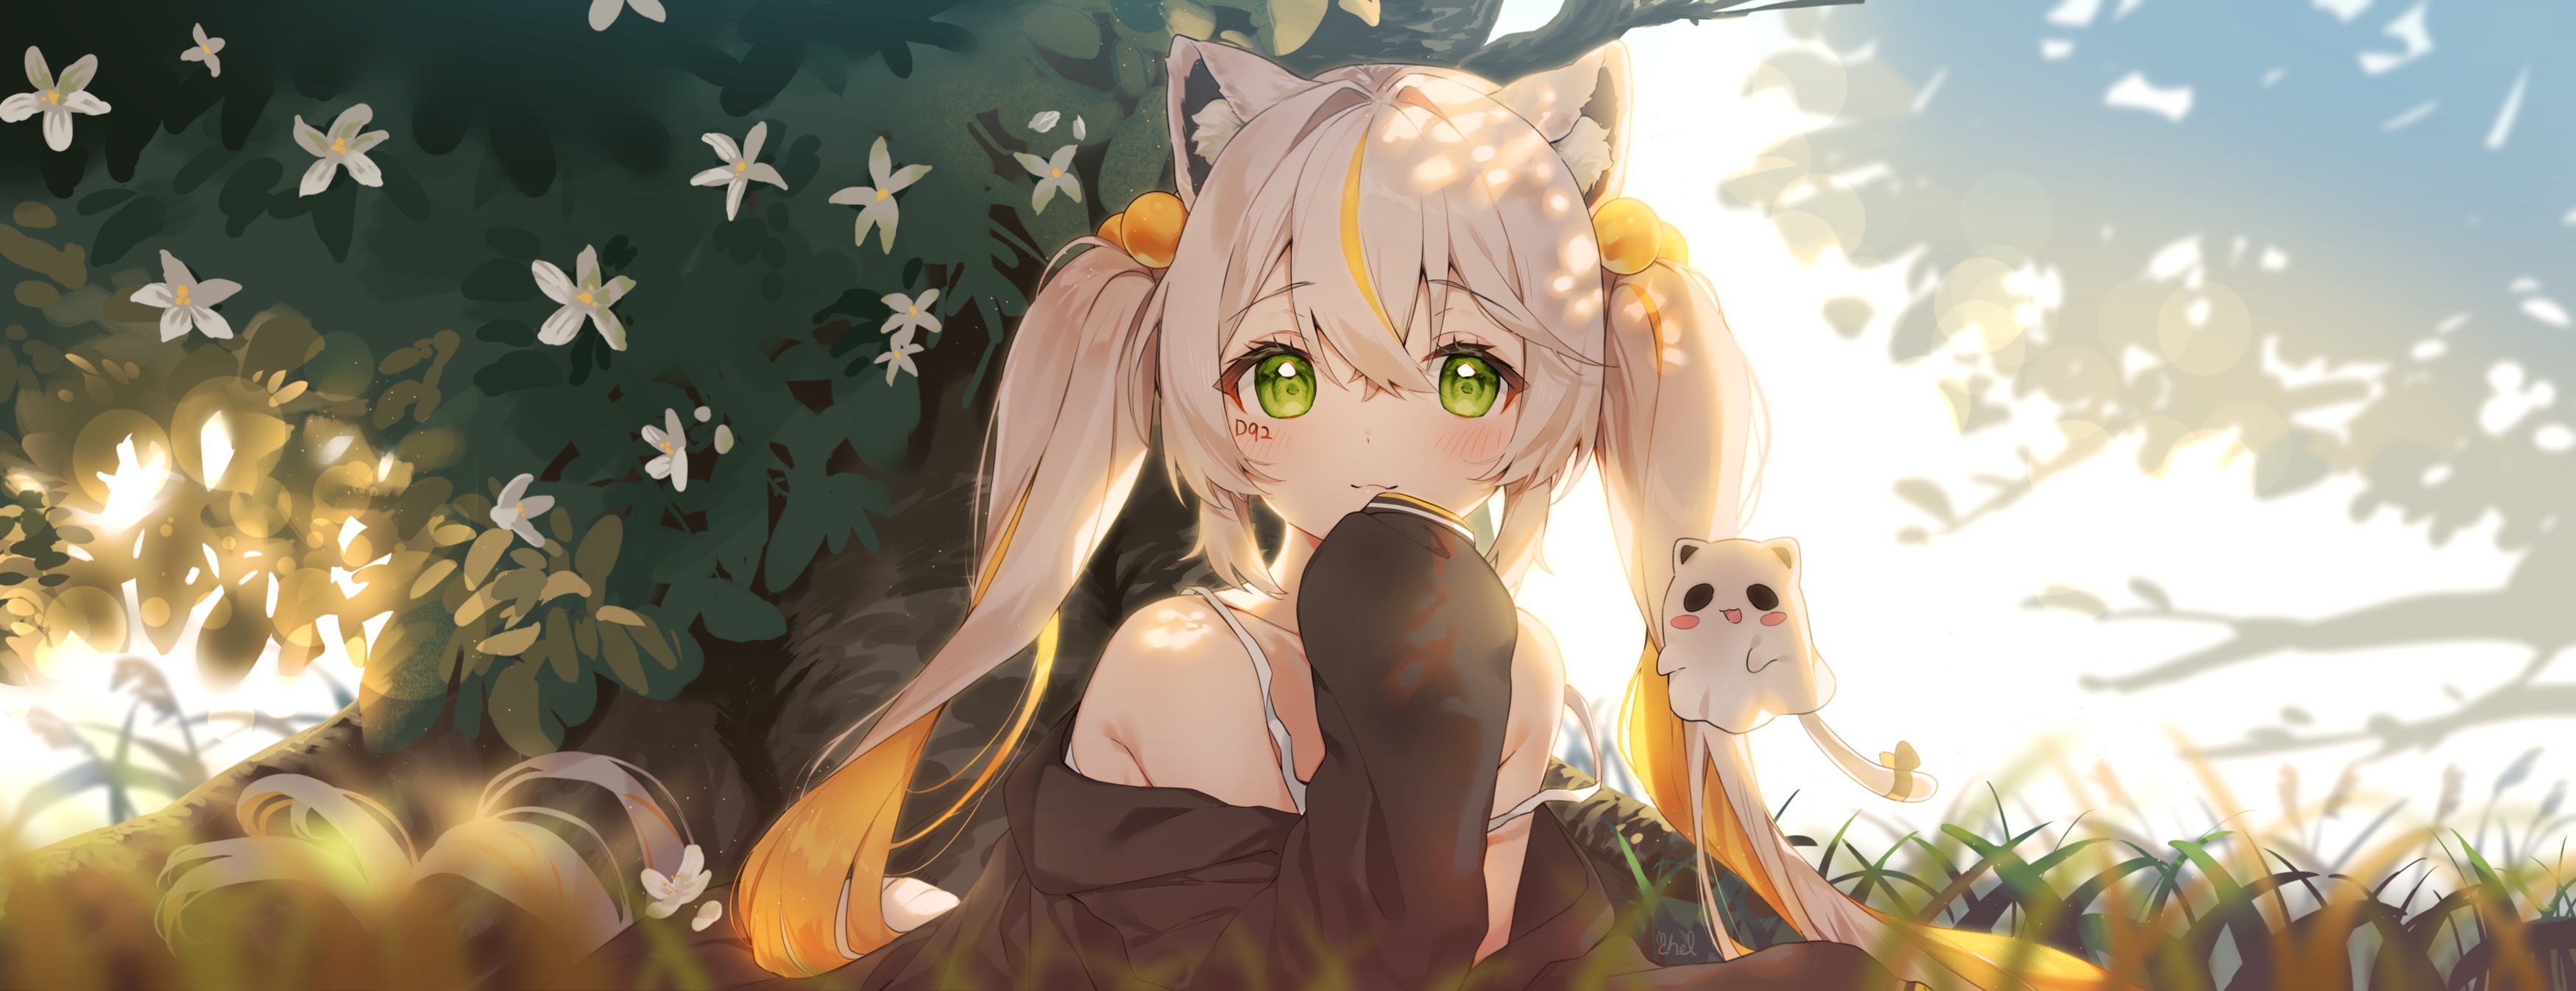 Anime Anime Girls Green Eyes Sunlight Flowers Plants Looking At Viewer Long Hair Twintails Blonde An 3500x1346